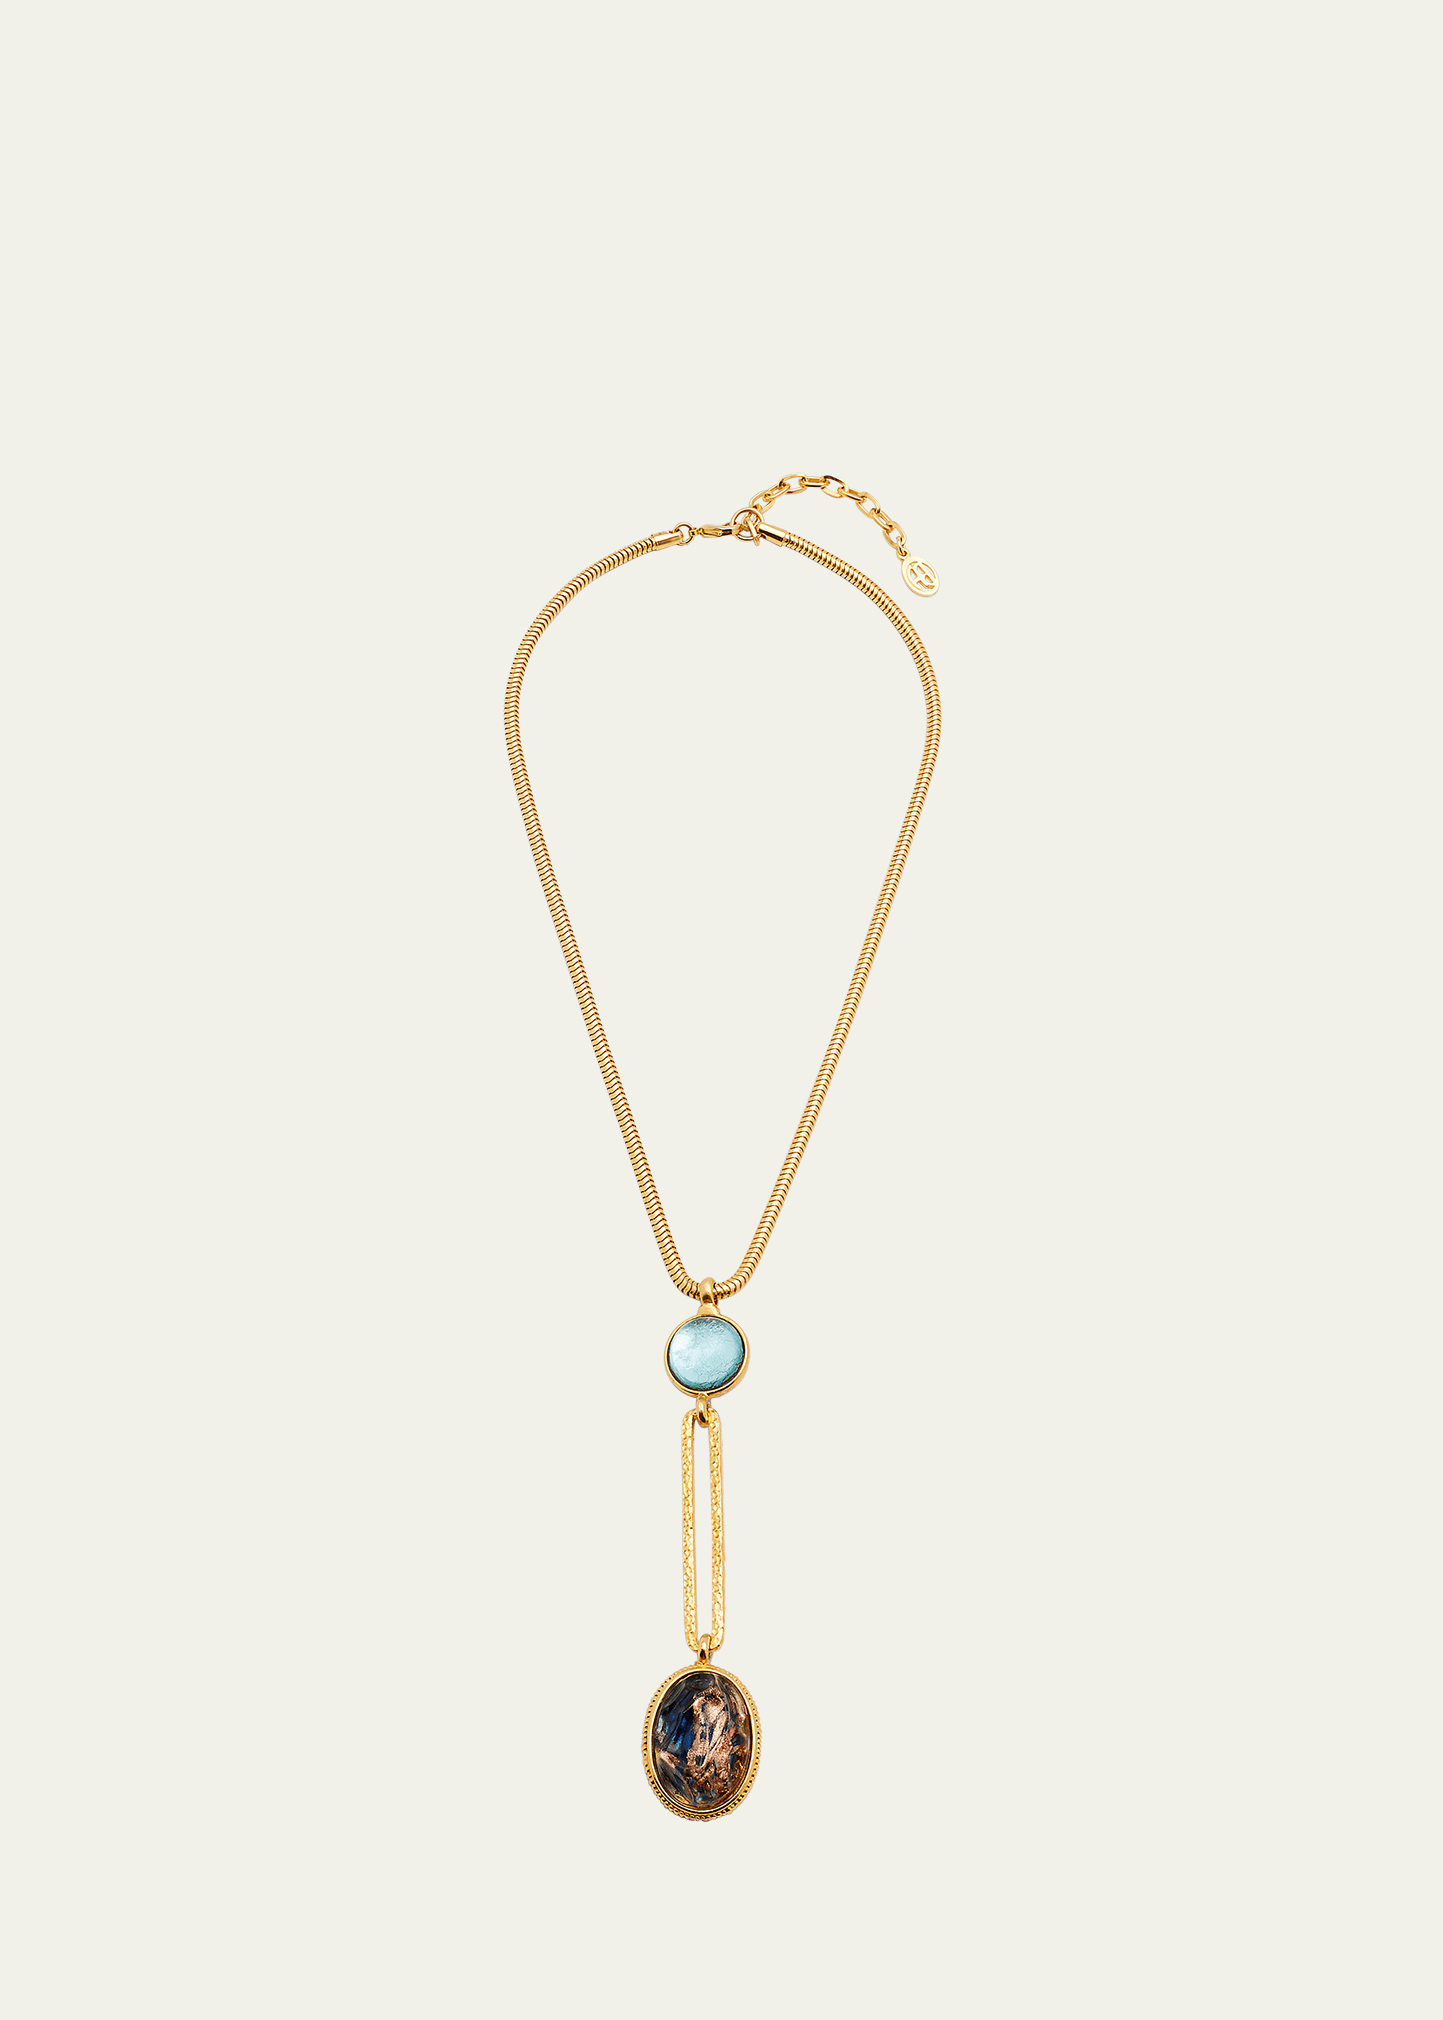 24K Snake Lariat Necklace with Stones